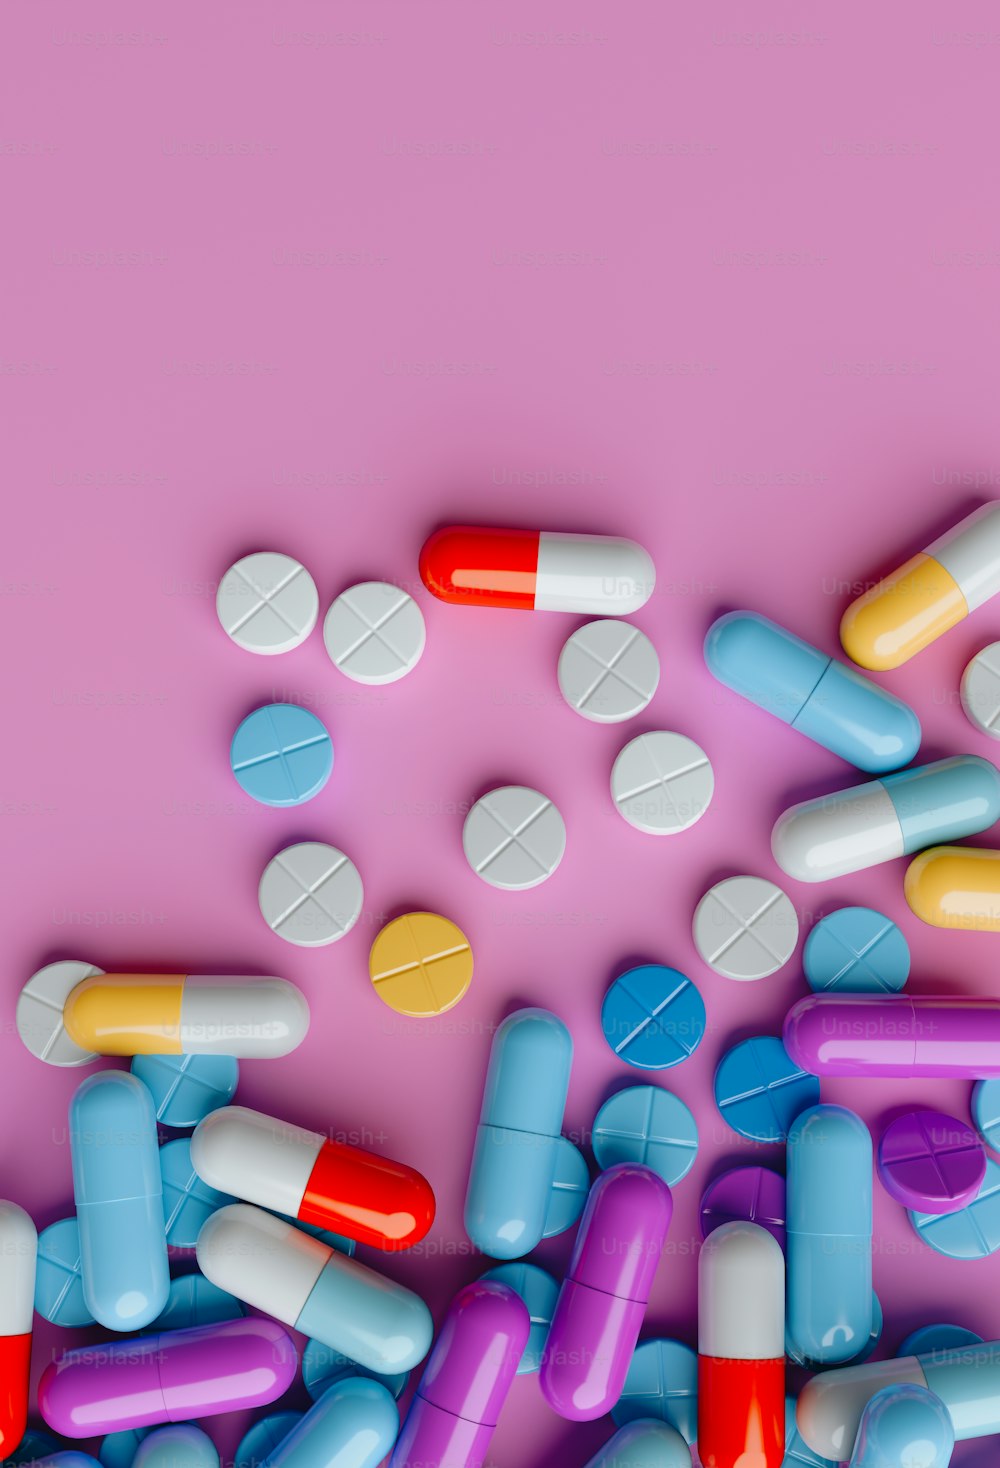 a pile of pills on a pink background